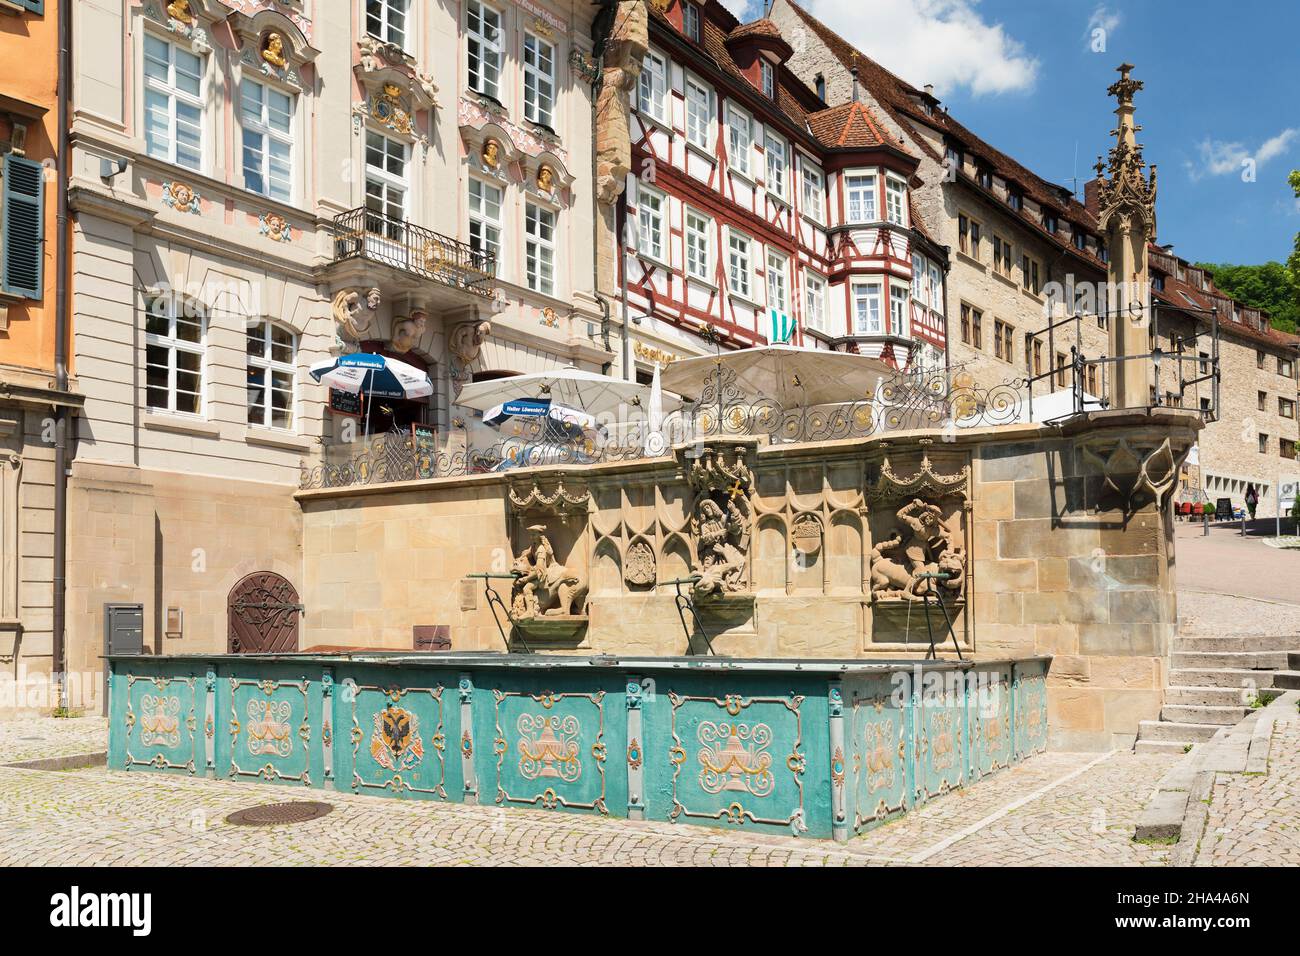 fish fountain and pillory on the market square,schwaebisch hall,hohenlohe,baden-württemberg,germany Stock Photo